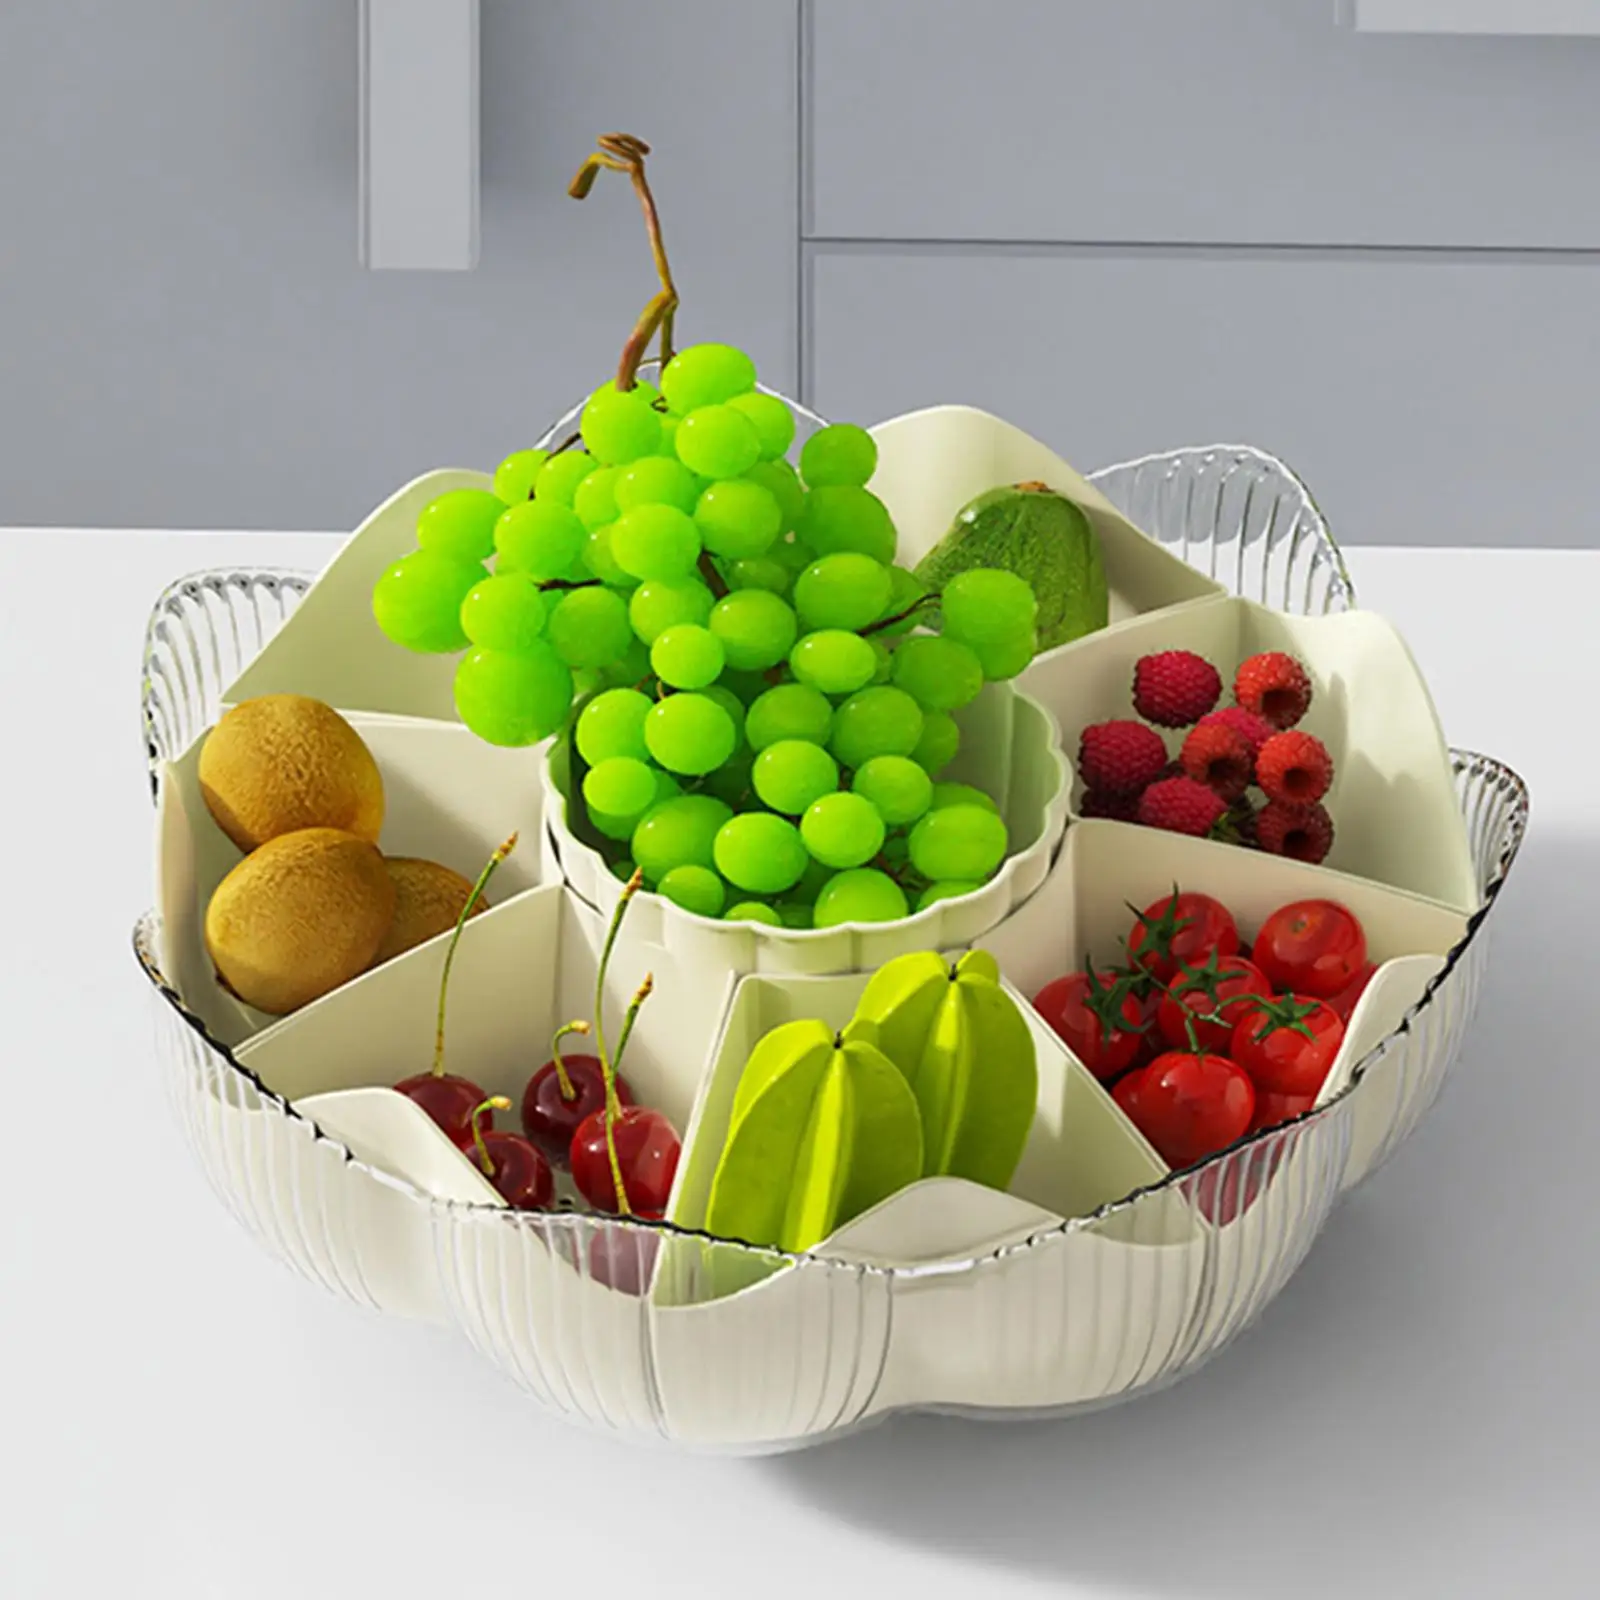 Divided Veggie Tray 8 Compartments Multipurpose Hot Pot Tray Party Serving Veggie Trays for Wedding BBQ Dinner Picnics Parties